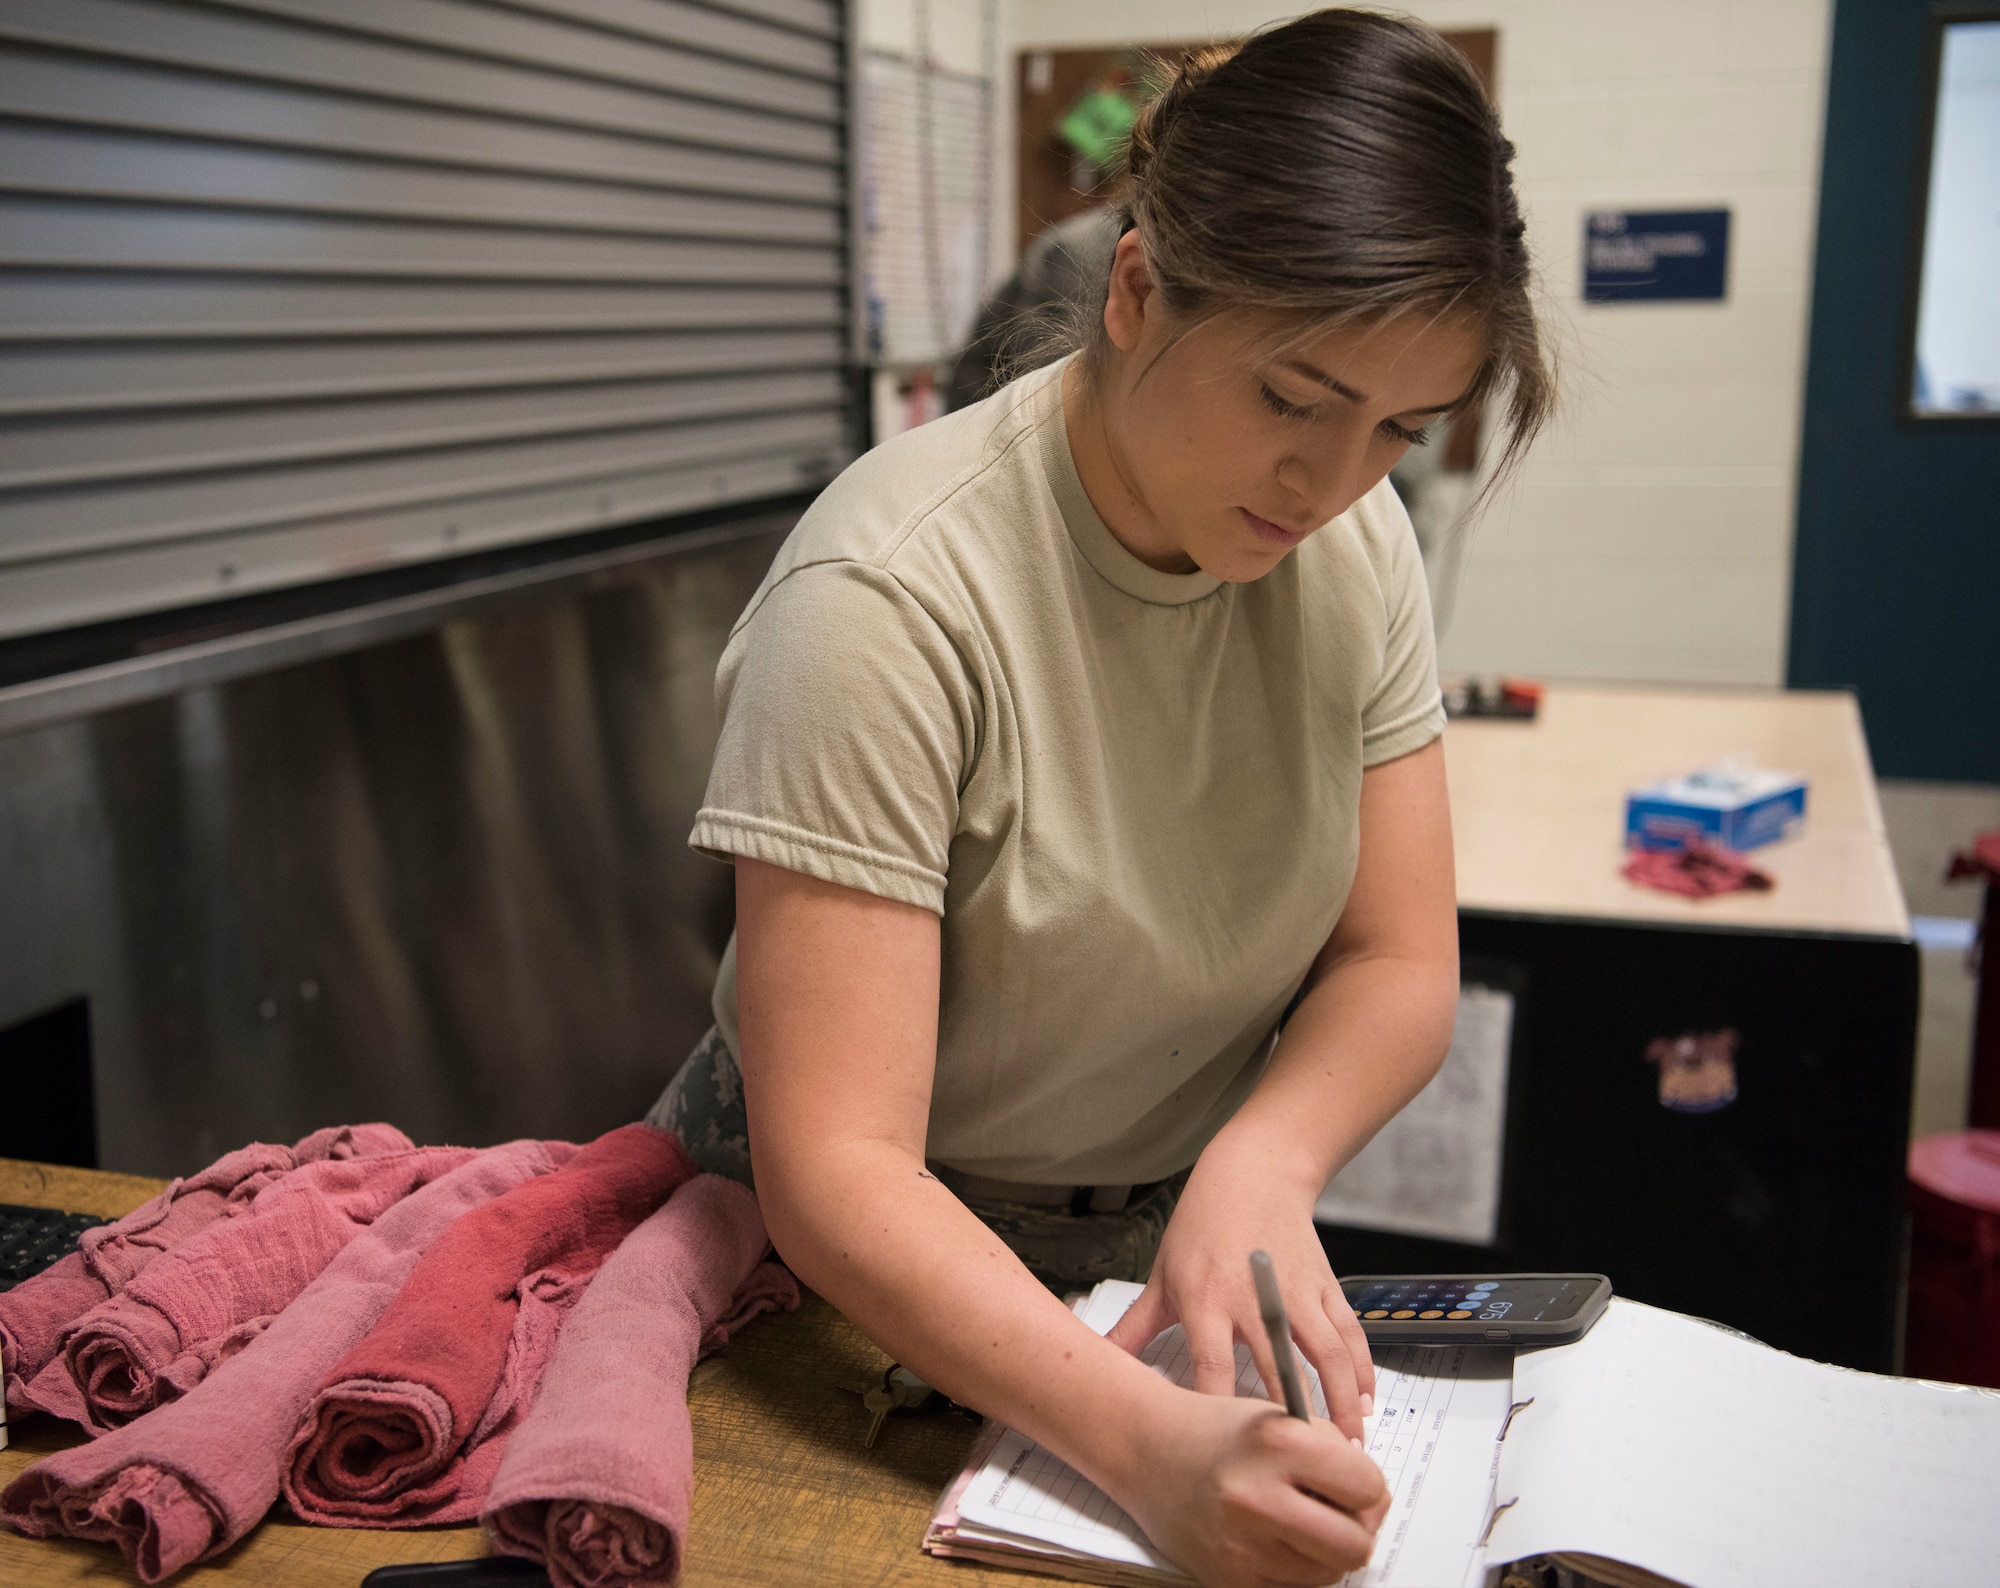 Senior Airman Isabella Ospina, a 525th Aircraft Maintenance Unit F-22 Raptor crew chief support technician, counts shop towels during a tool and equipment shift inventory at Joint Base Elmendorf-Richardson, Alaska, July 19, 2018. Ospina is responsible for the issue and control of more than 10,000 tools during one of three shift inventories.